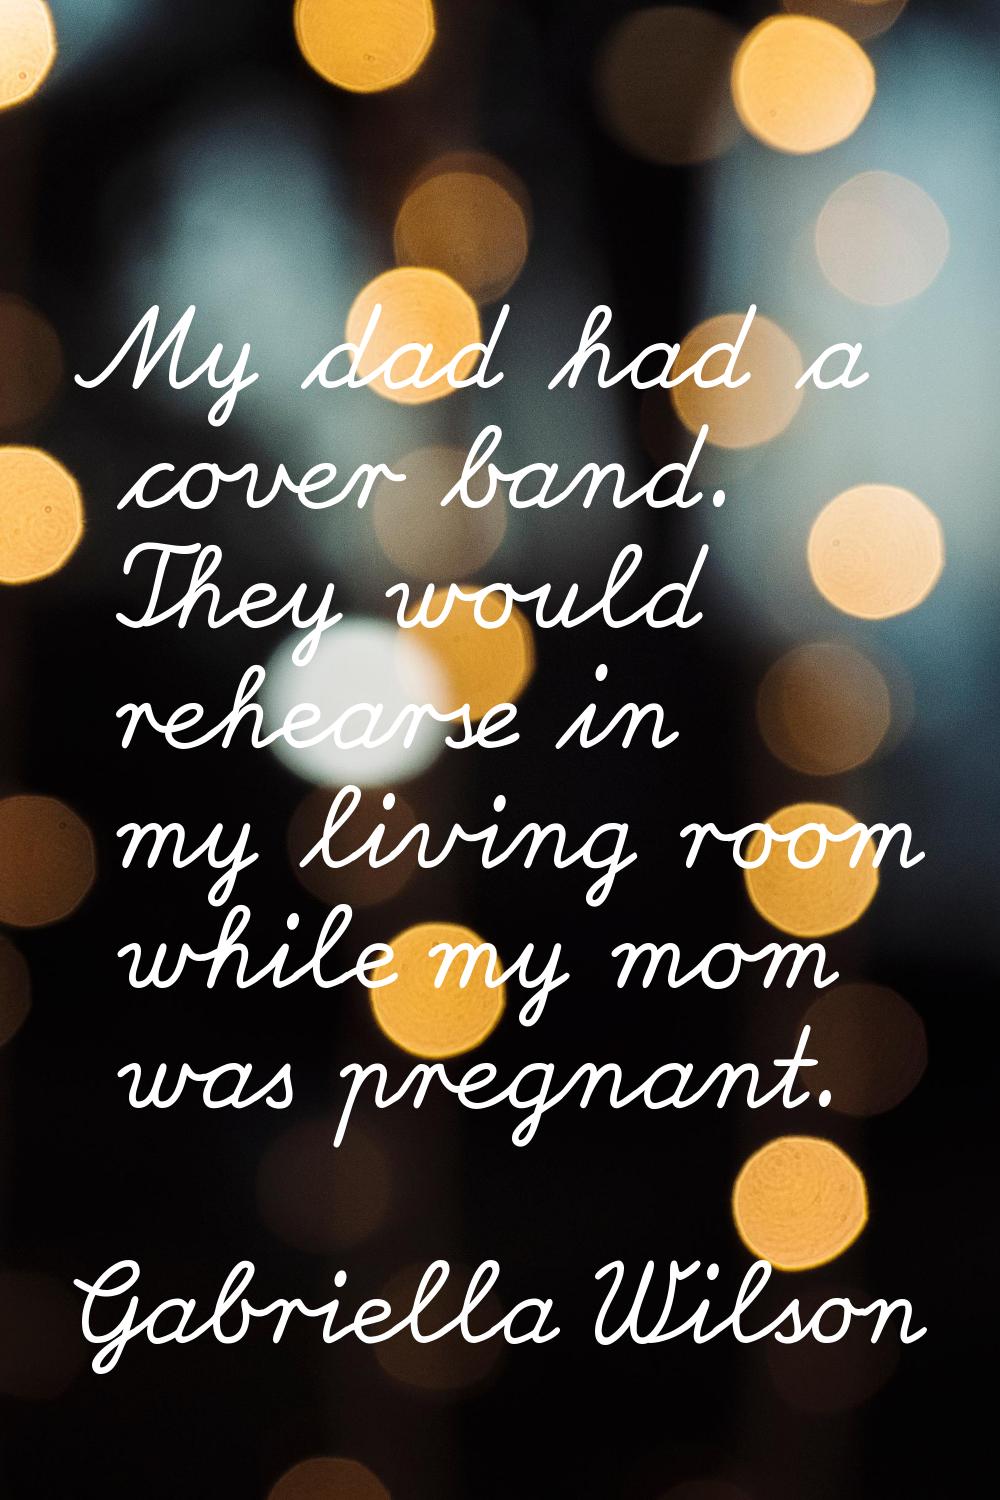 My dad had a cover band. They would rehearse in my living room while my mom was pregnant.